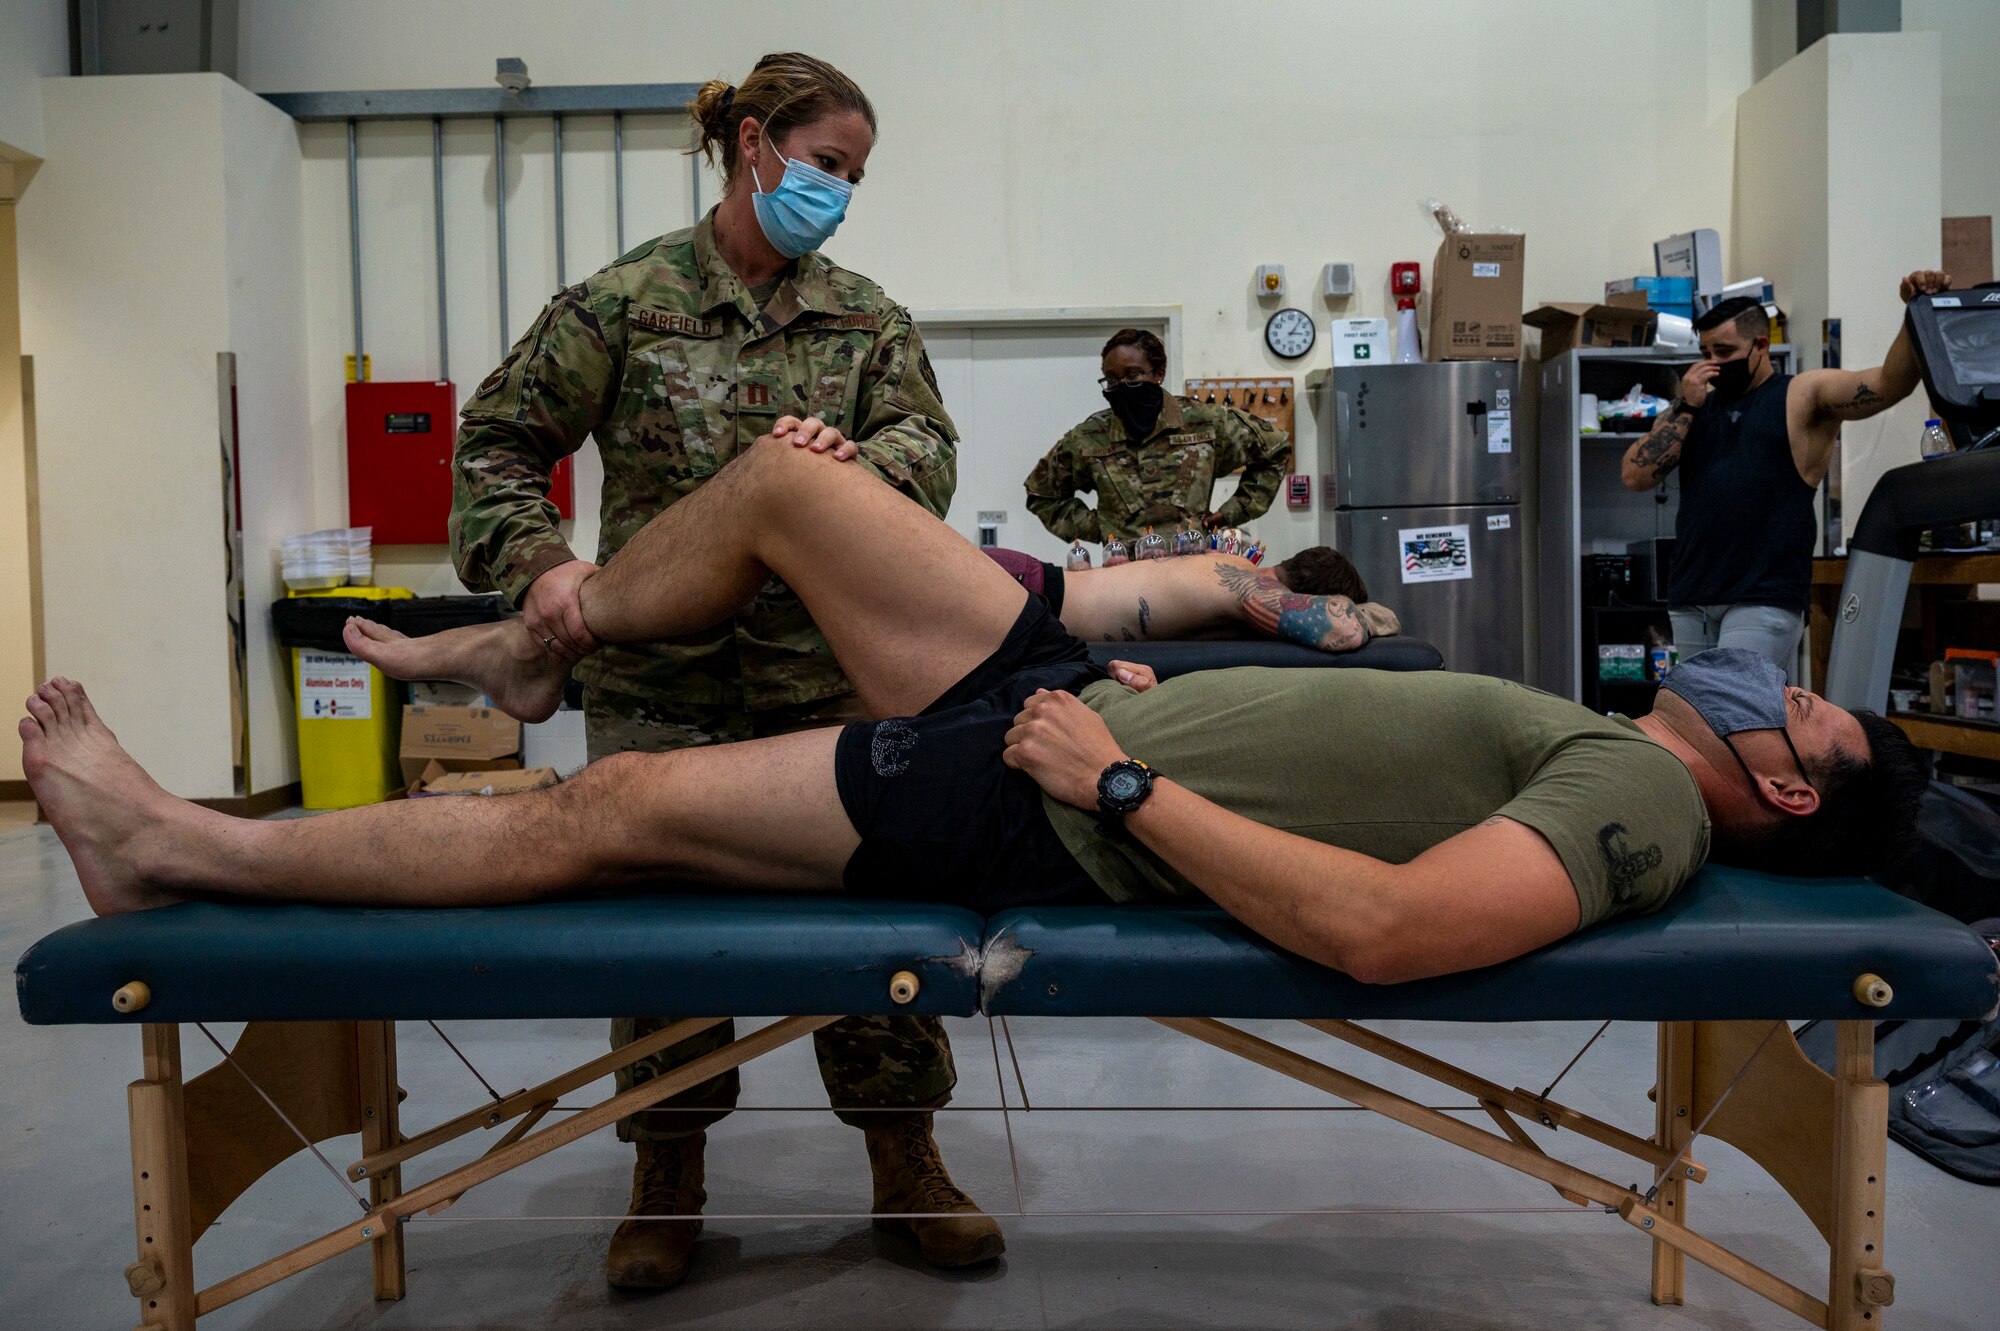 U.S. Air Force Capt. Kassia Garfield, 380th Expeditionary Medical Group (EMDG) physical therapist, performs stretches on Maj. Bryant Hankins, 380th Expeditionary Civil Engineer Squadron (ECES) explosive ordnance disposal technician, during an in-house physical therapy session at Al Dhafra Air Base (ADAB), United Arab Emirates, Dec. 15, 2020.